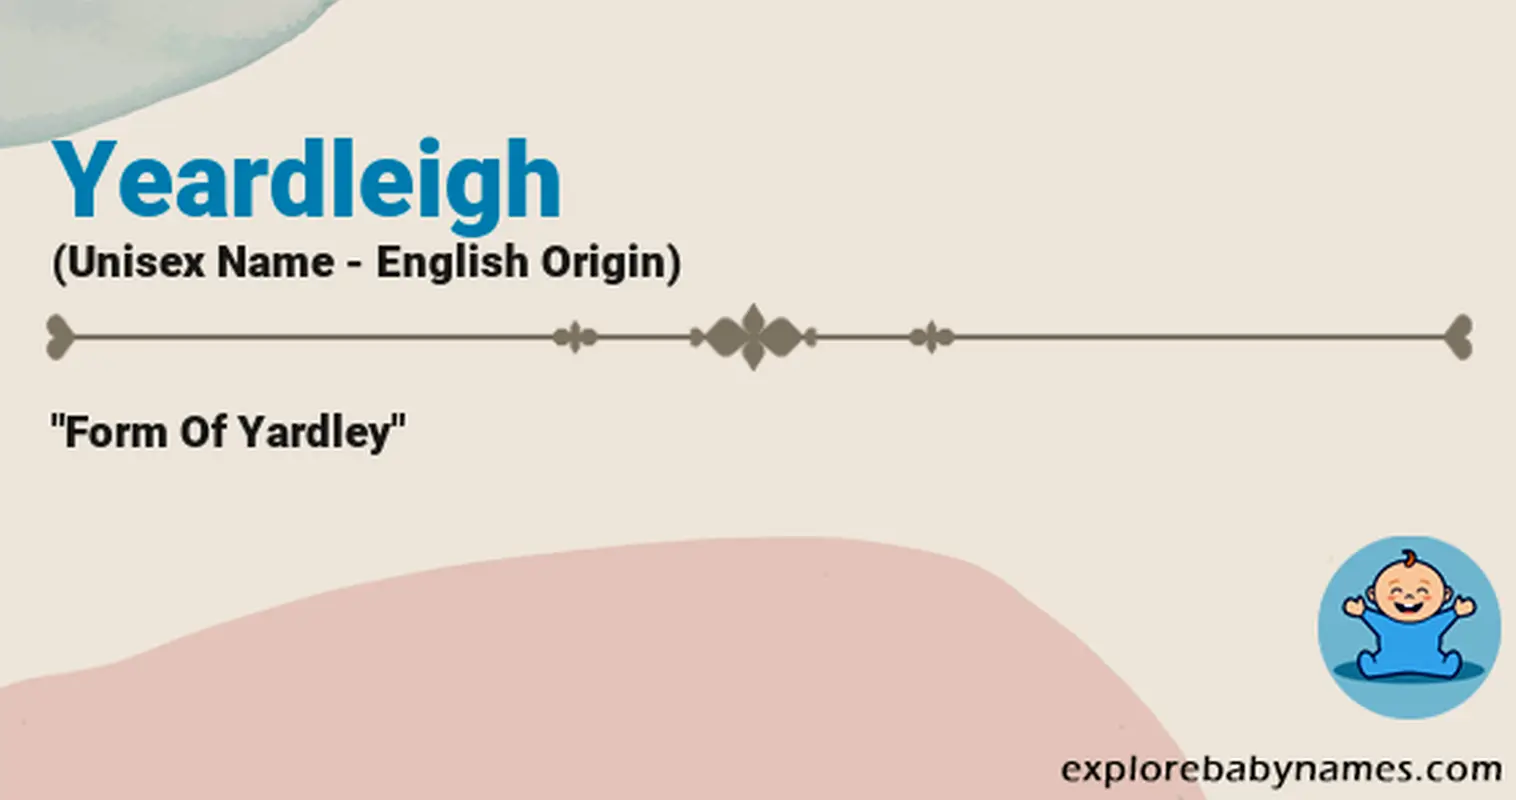 Meaning of Yeardleigh